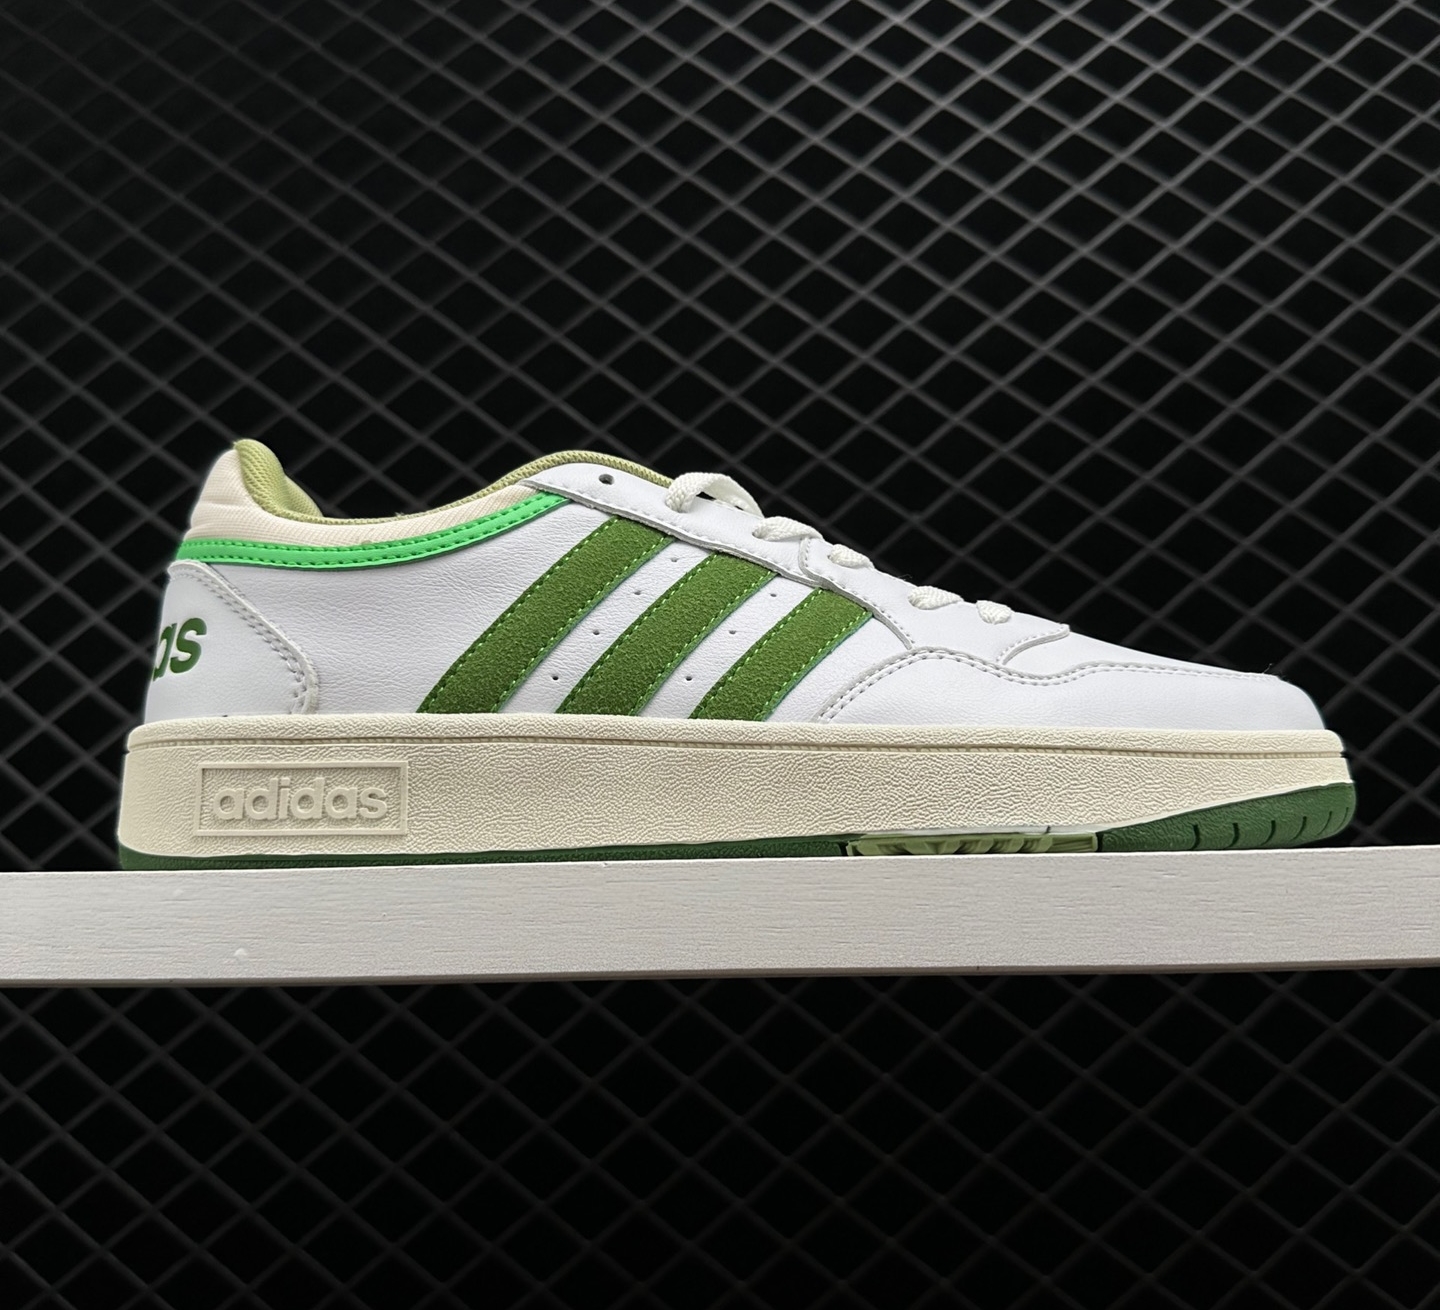 Adidas Neo Hoops 3.0 'White Green' GX9773 - Stylish Sneakers for Men